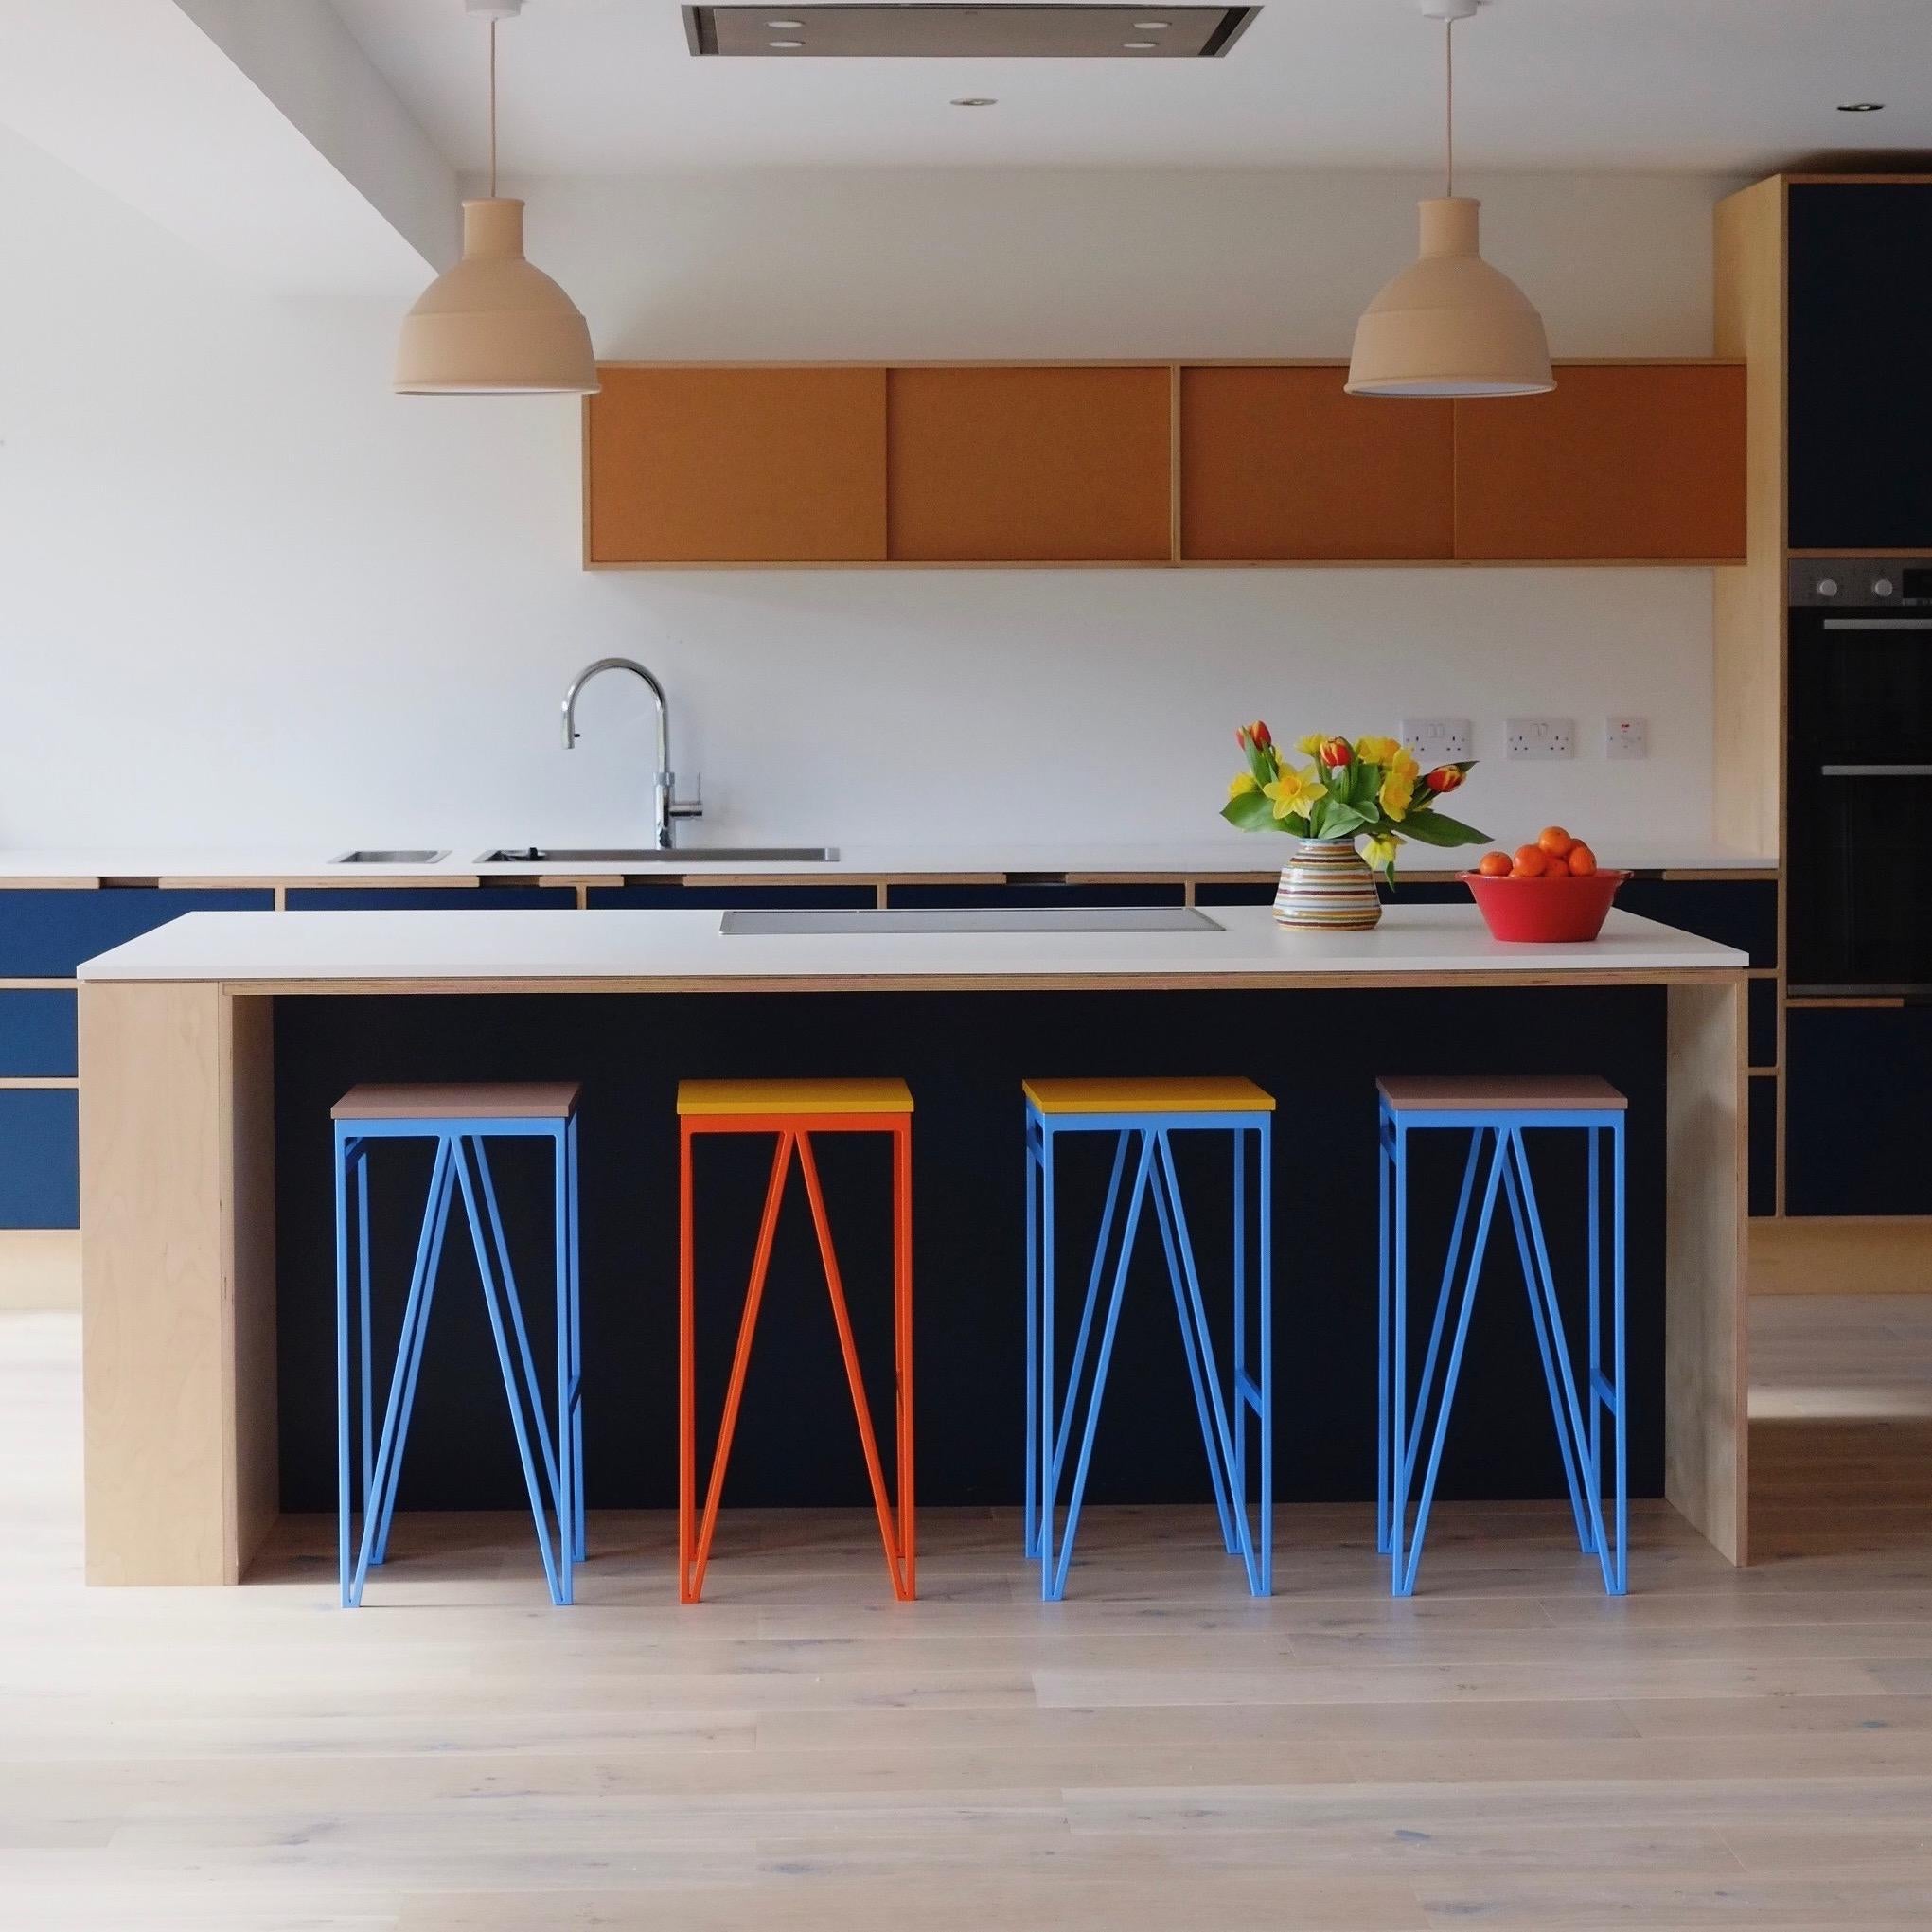 Minimalist Set of 4 Colour Play Tall Kitchen, Bar Stools, Customisable For Sale